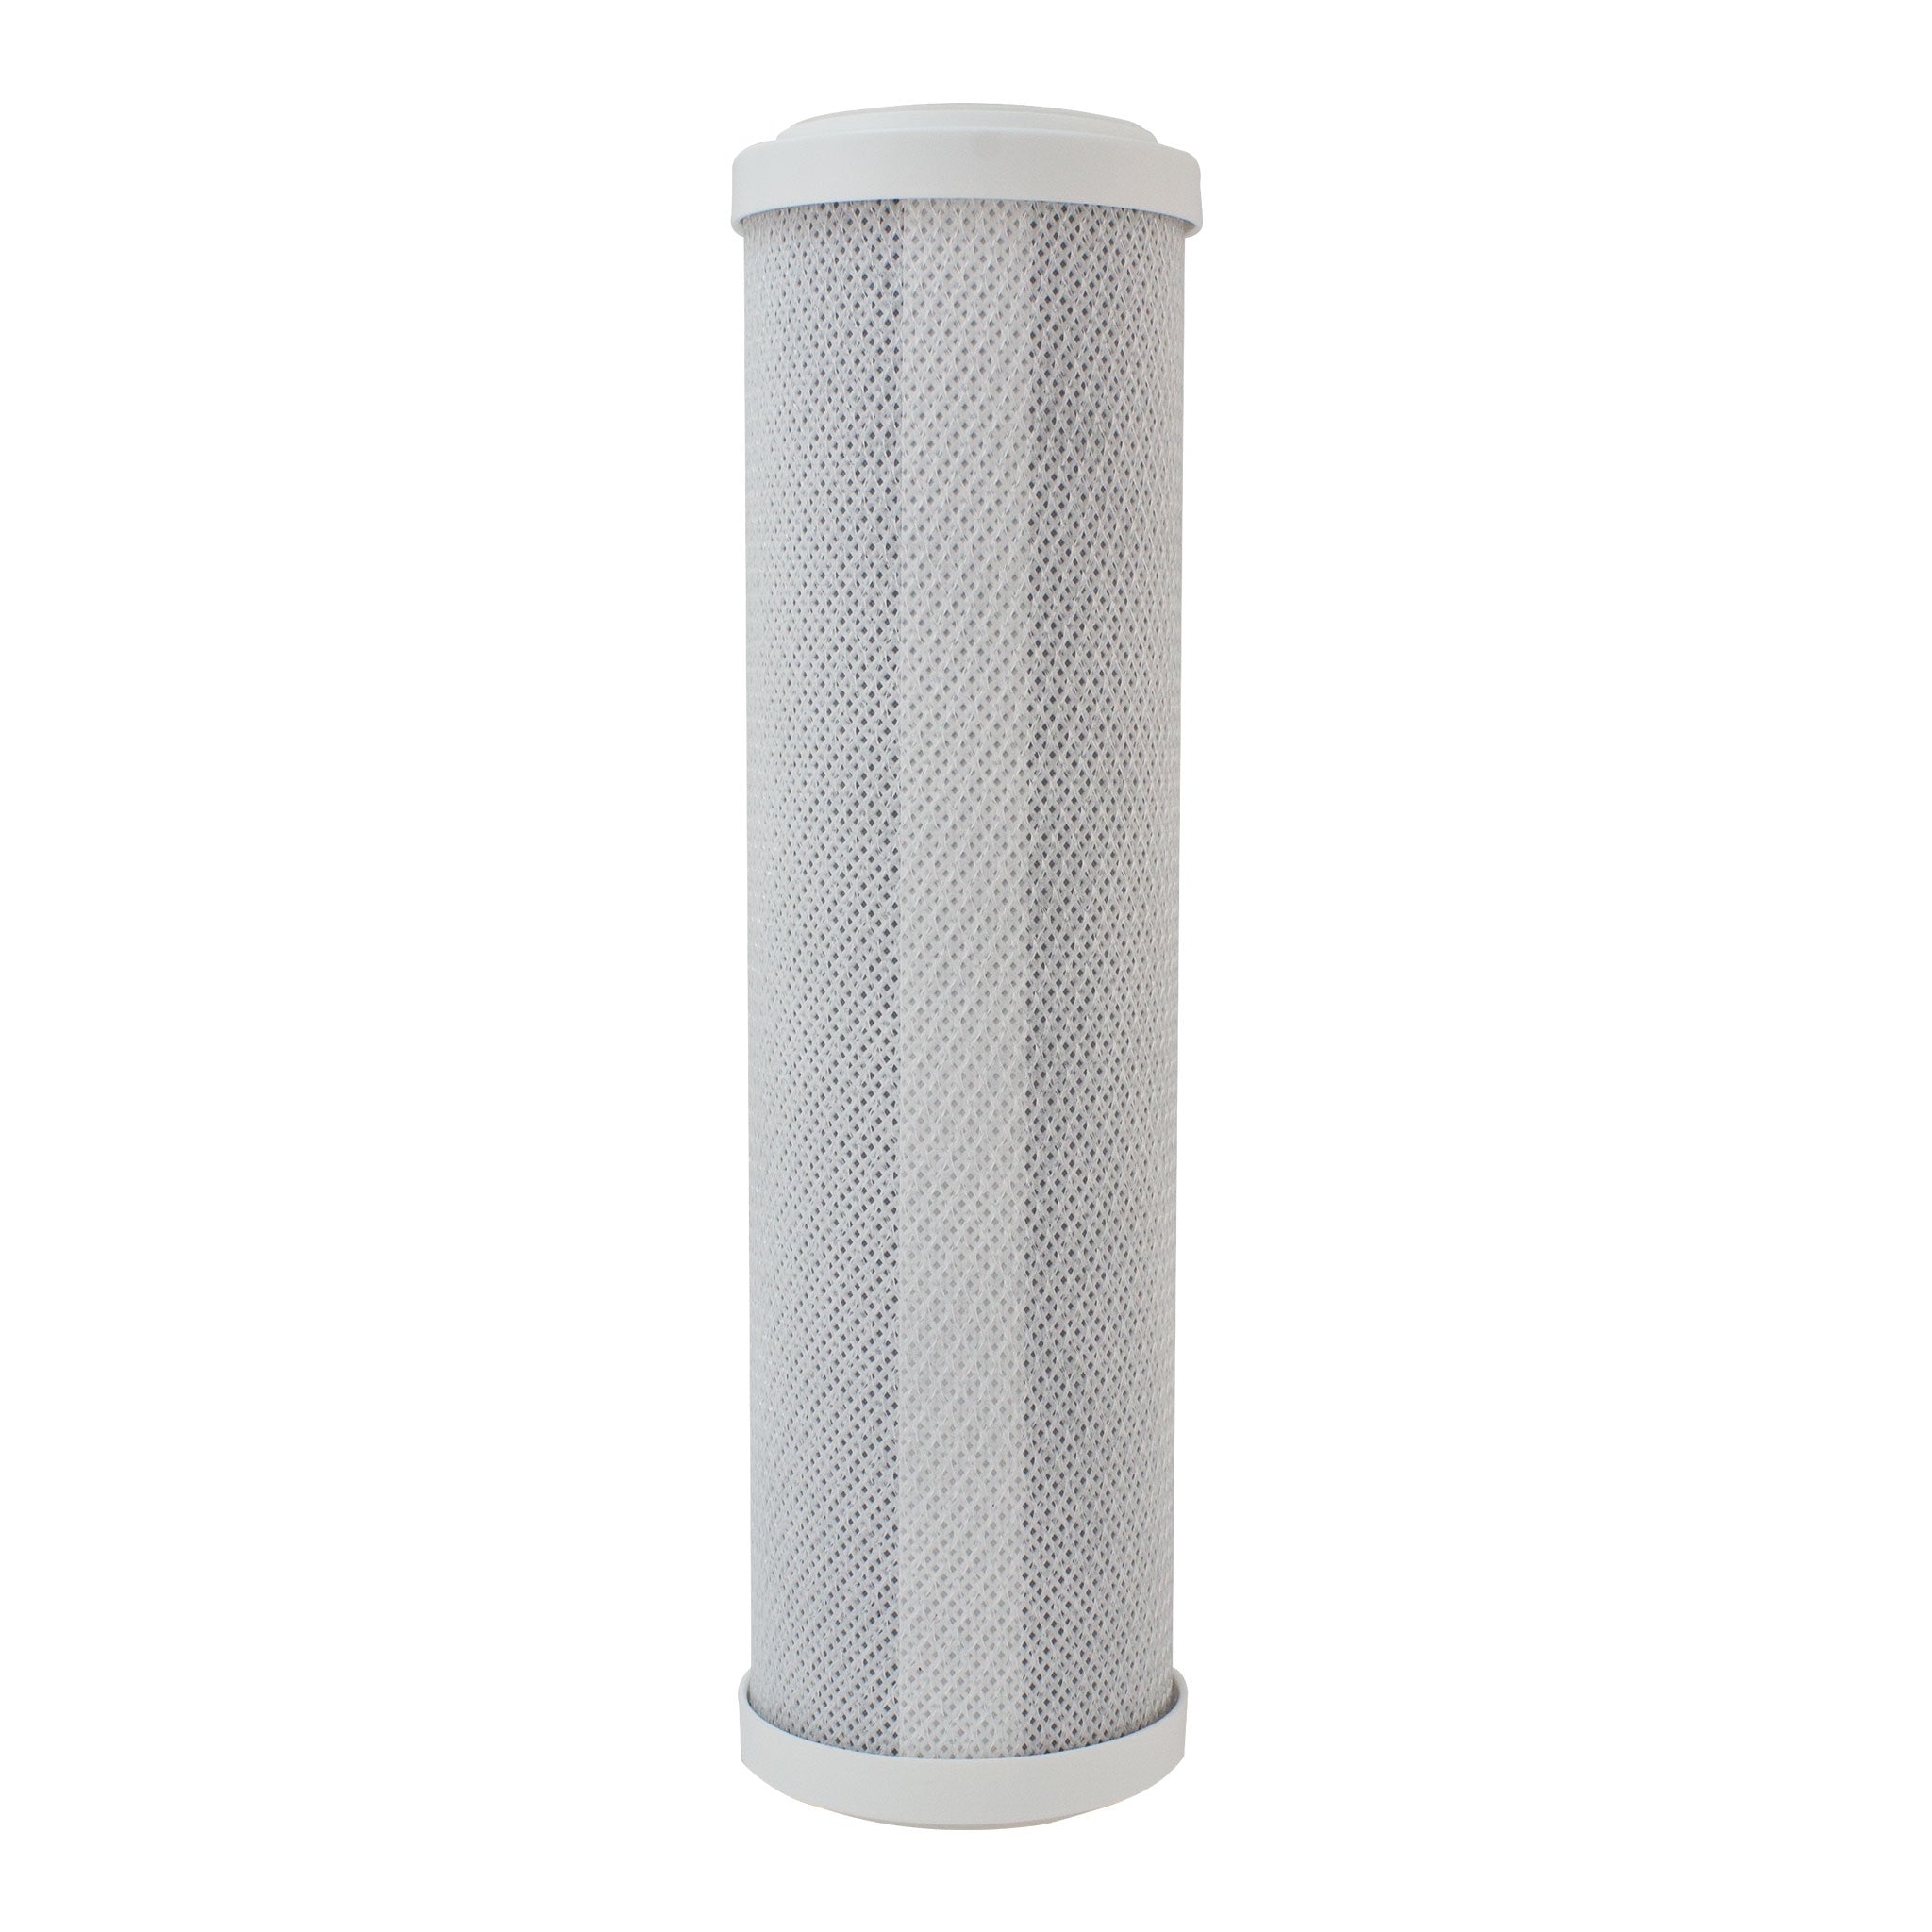 2.5" x 10" Carbon Block Filter Replacement for RO Drinking Water Filter System @ 5 micron. NSF certified.